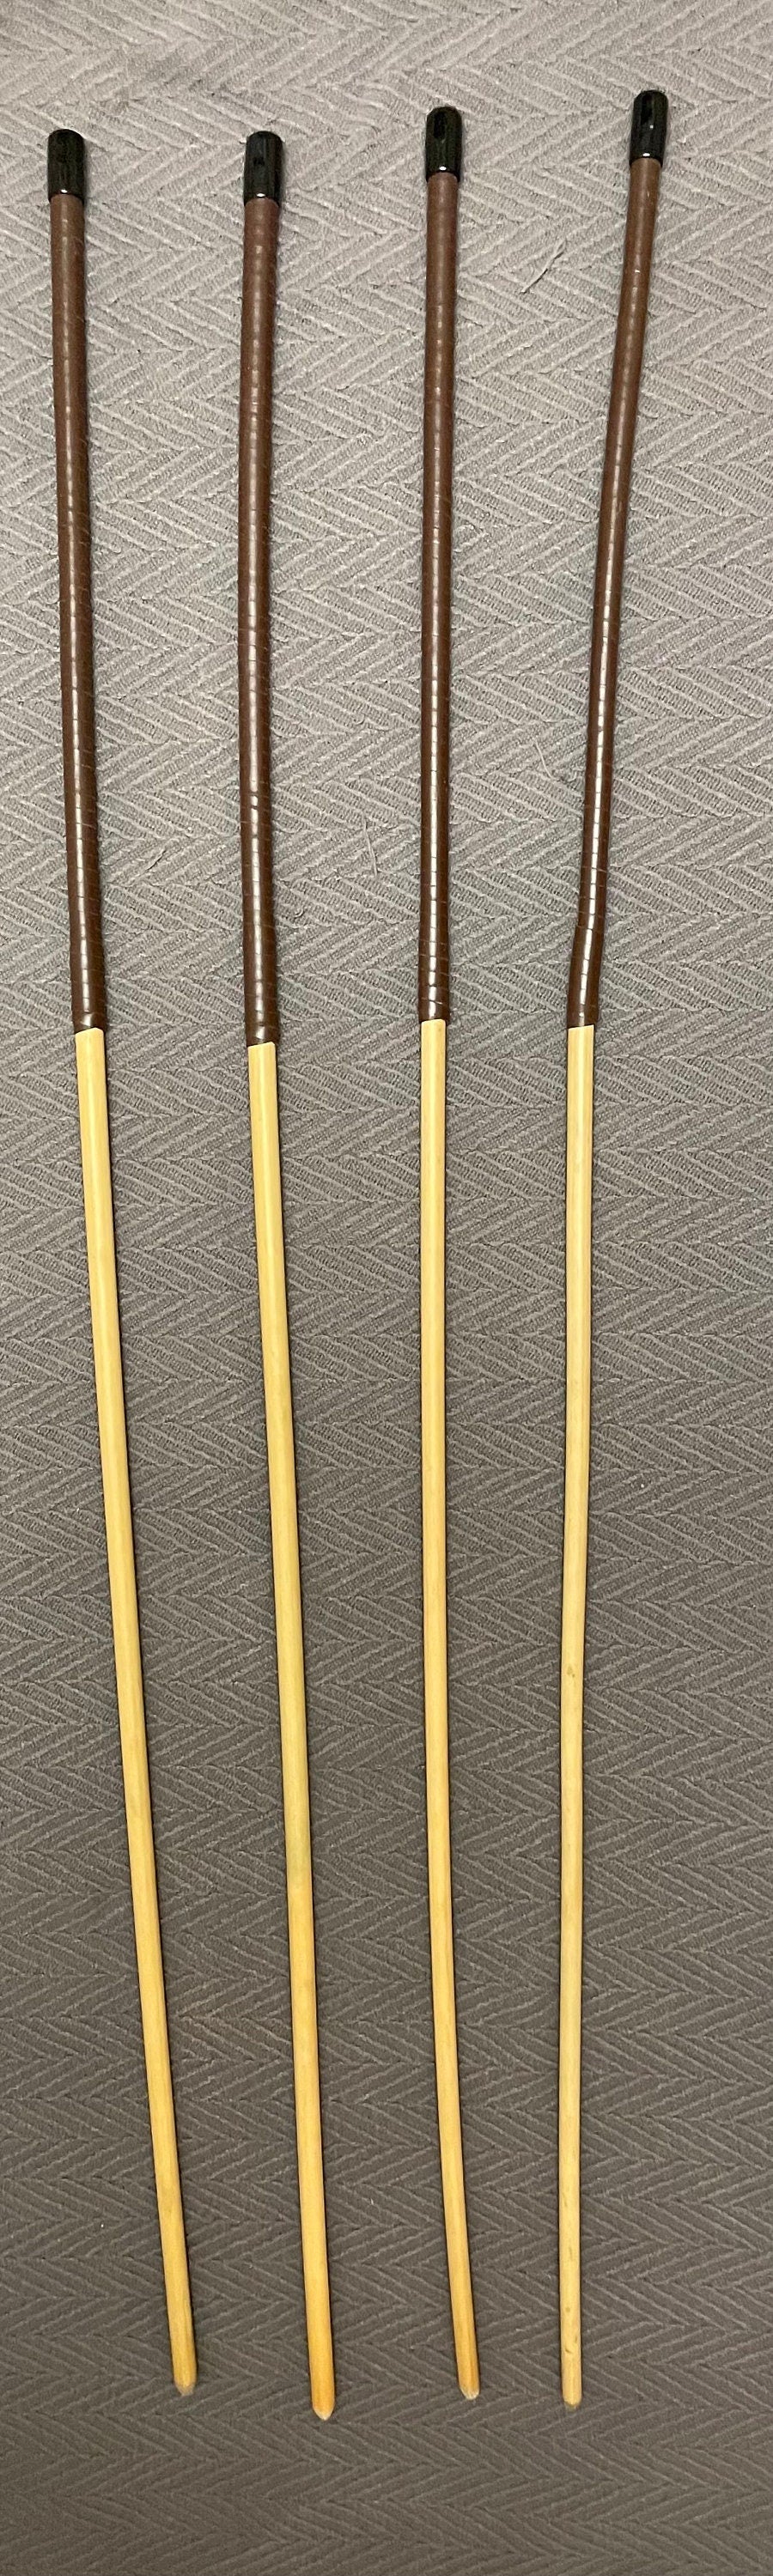 Knotless Dragon Canes / Ultimate Rattan Canes Set of 4 with Brandy Kangaroo Leather Handles 92 cms Length - Englishvice Canes